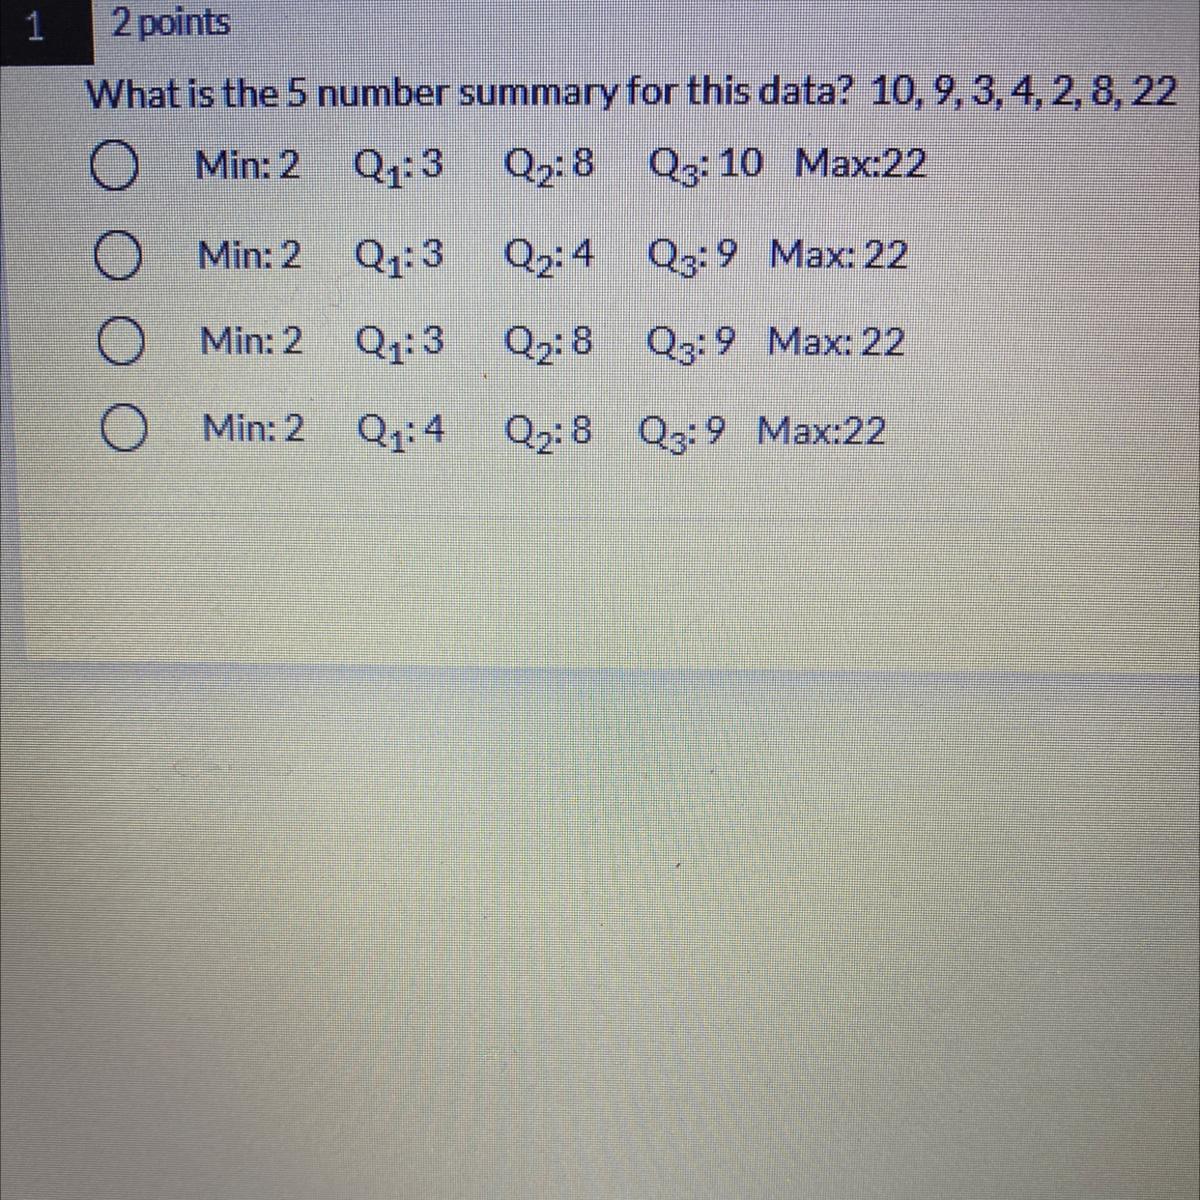 What Is The 5 Number Summary For This Data? 10,9,3, 4, 2, 8, 22NO LINKS